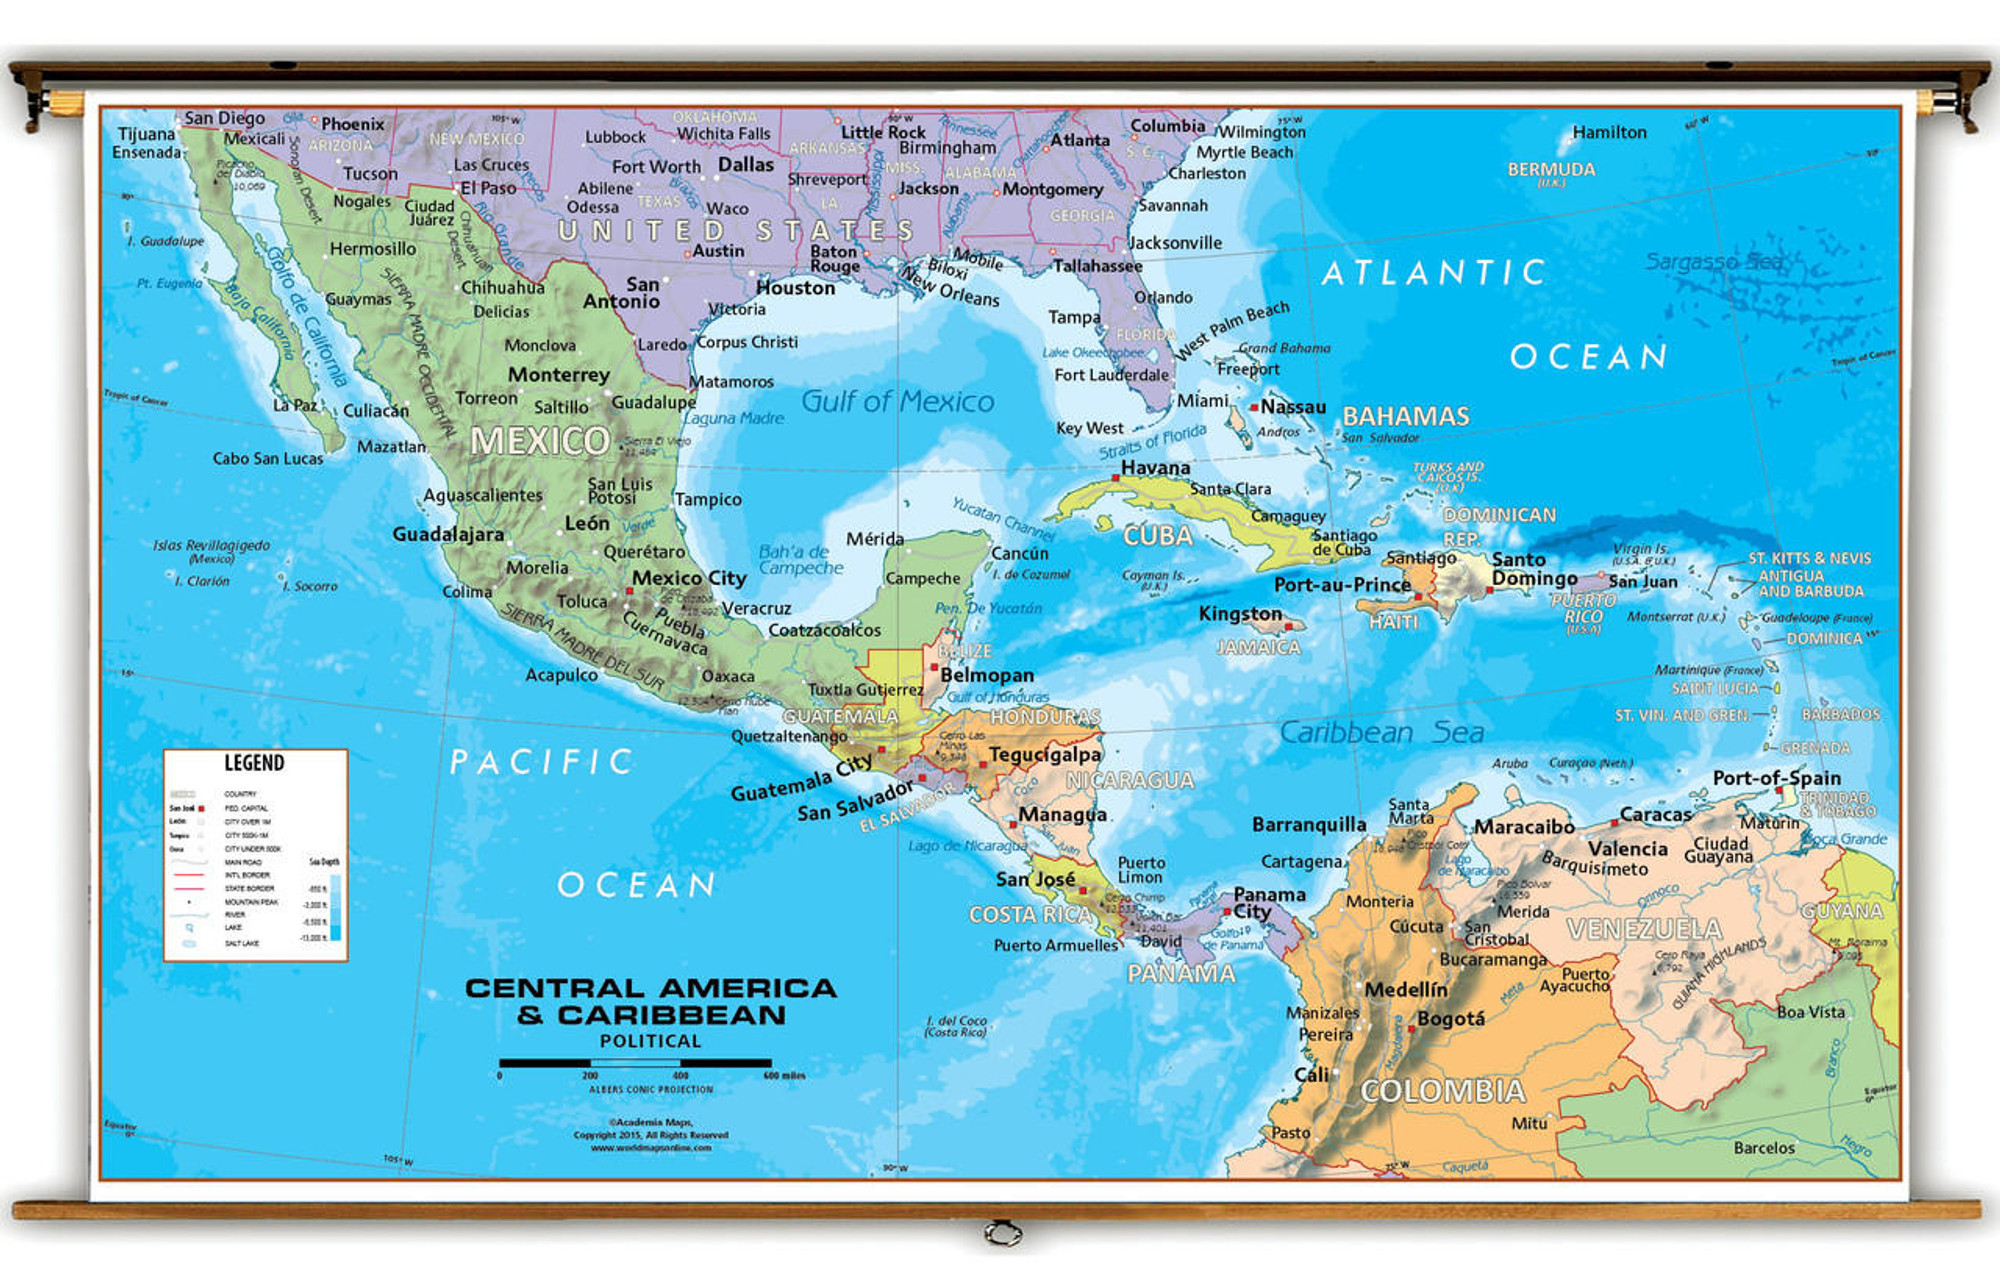 Central America & Caribbean Political Classroom Map from Academia, image 1, World Maps Online